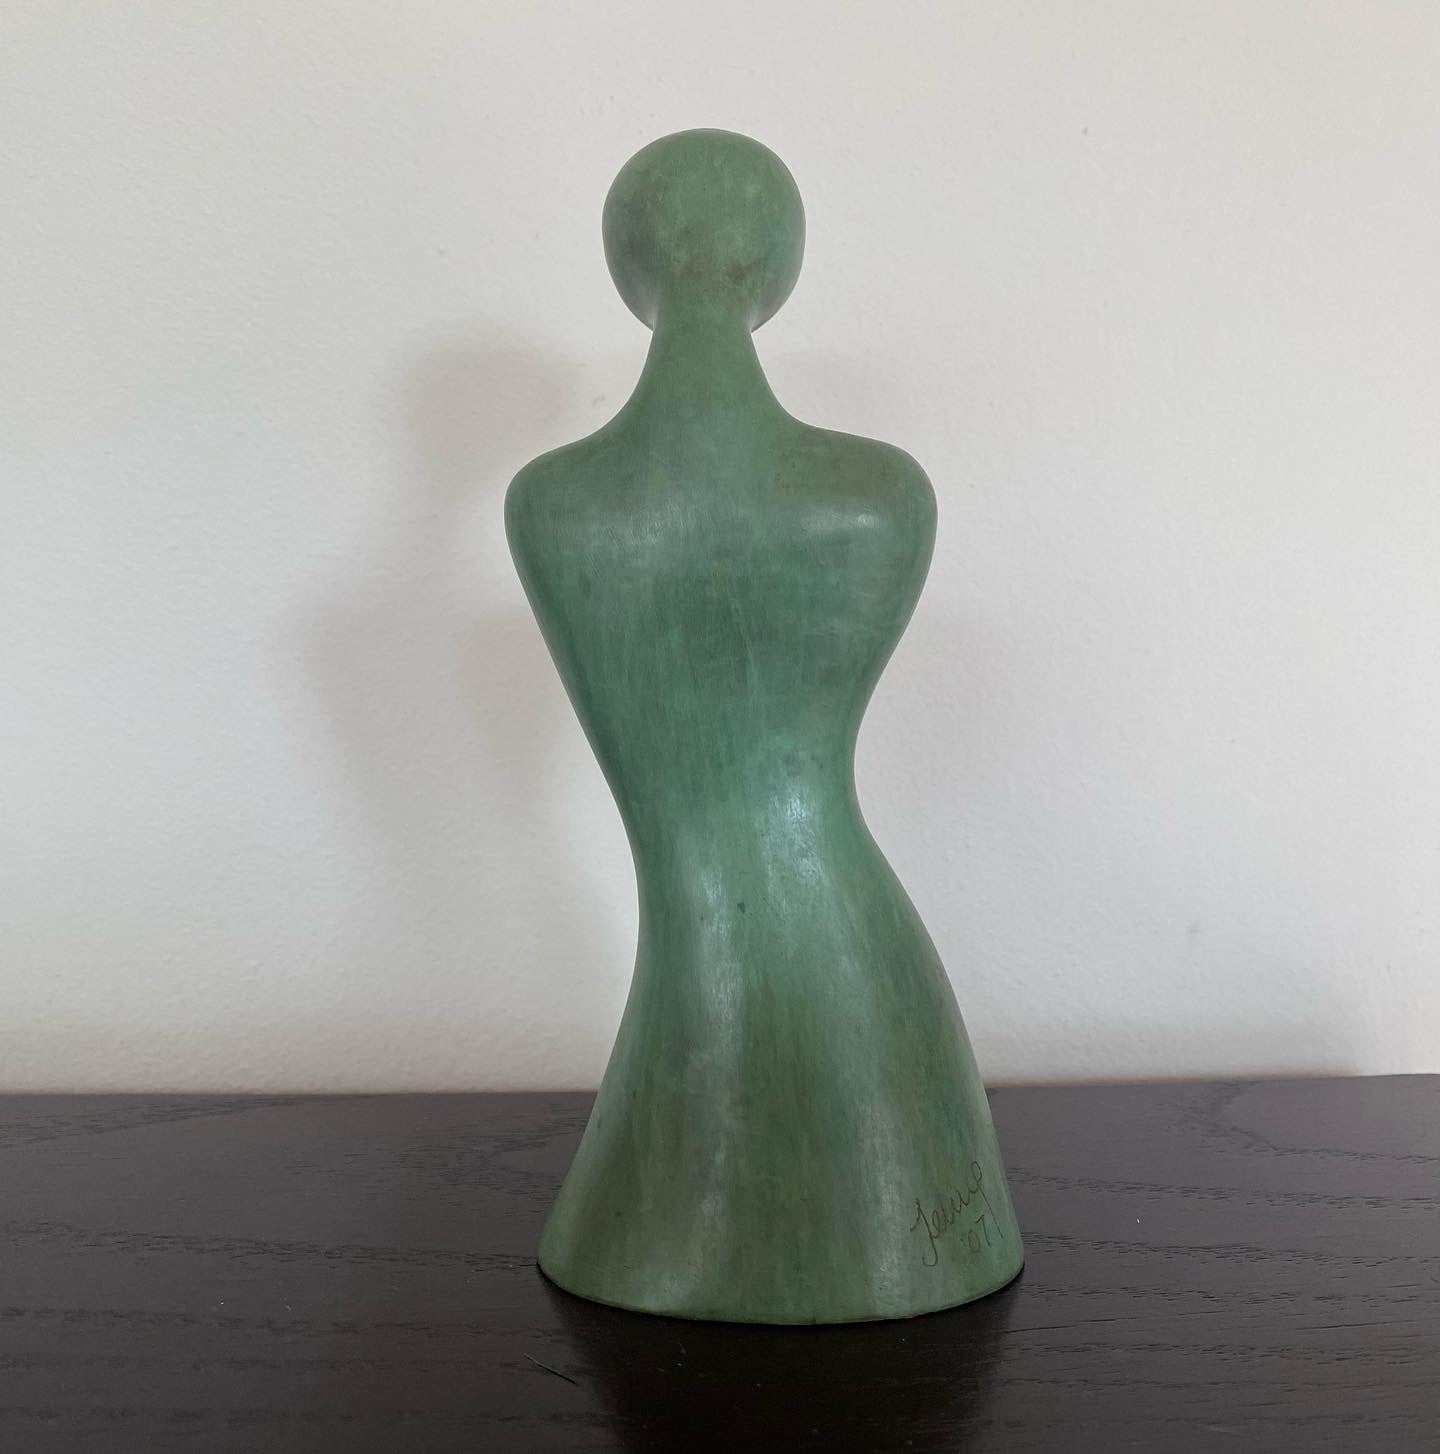 Mexican bronze Sculpture by Jennifer Troice “ untitled “